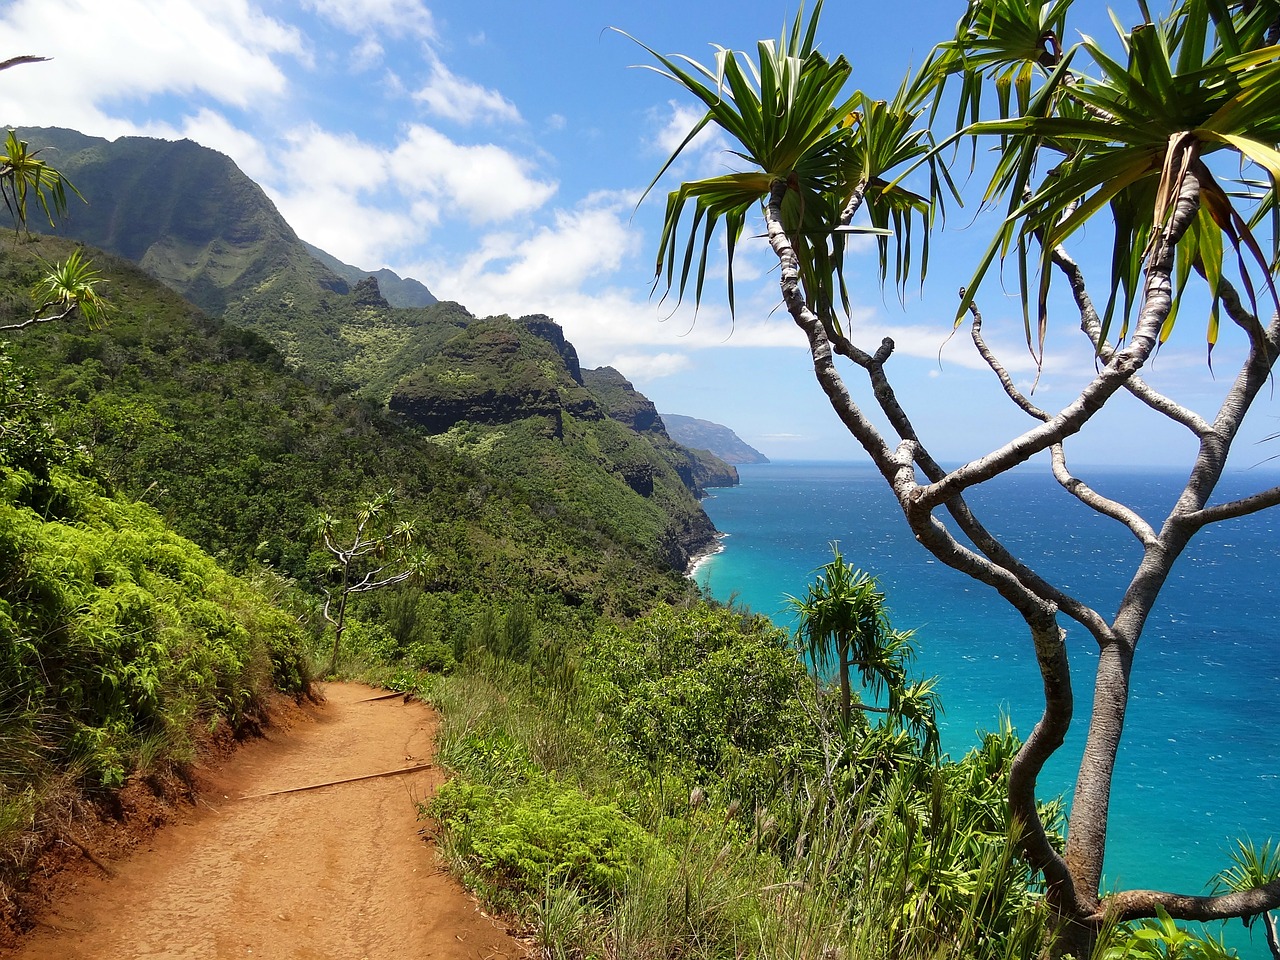 When you go to explore Kauai, be sure to check out the Na Pali Coast ... photo by CC user kdvandeventer on pixabay